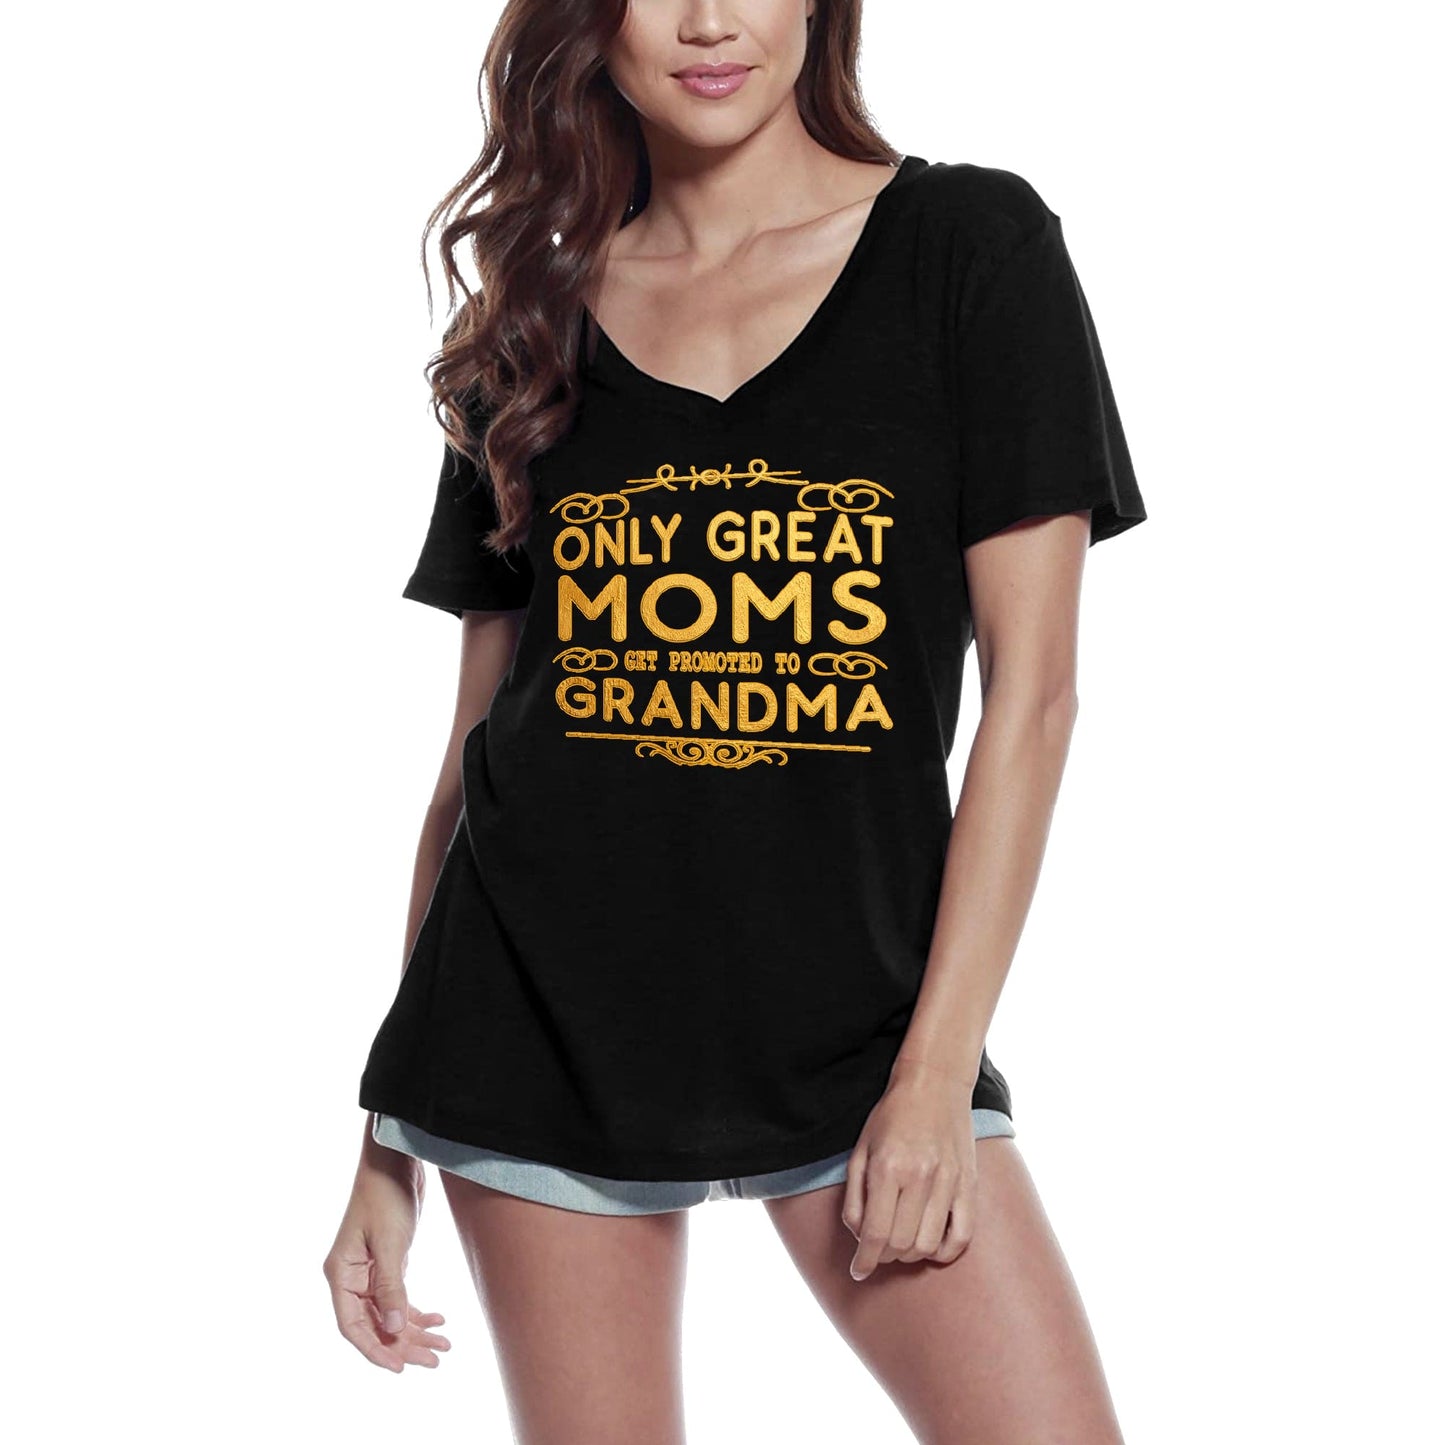 ULTRABASIC Women's T-Shirt Only Great Moms Get Promoted to Grandma - Tee Shirt Tops